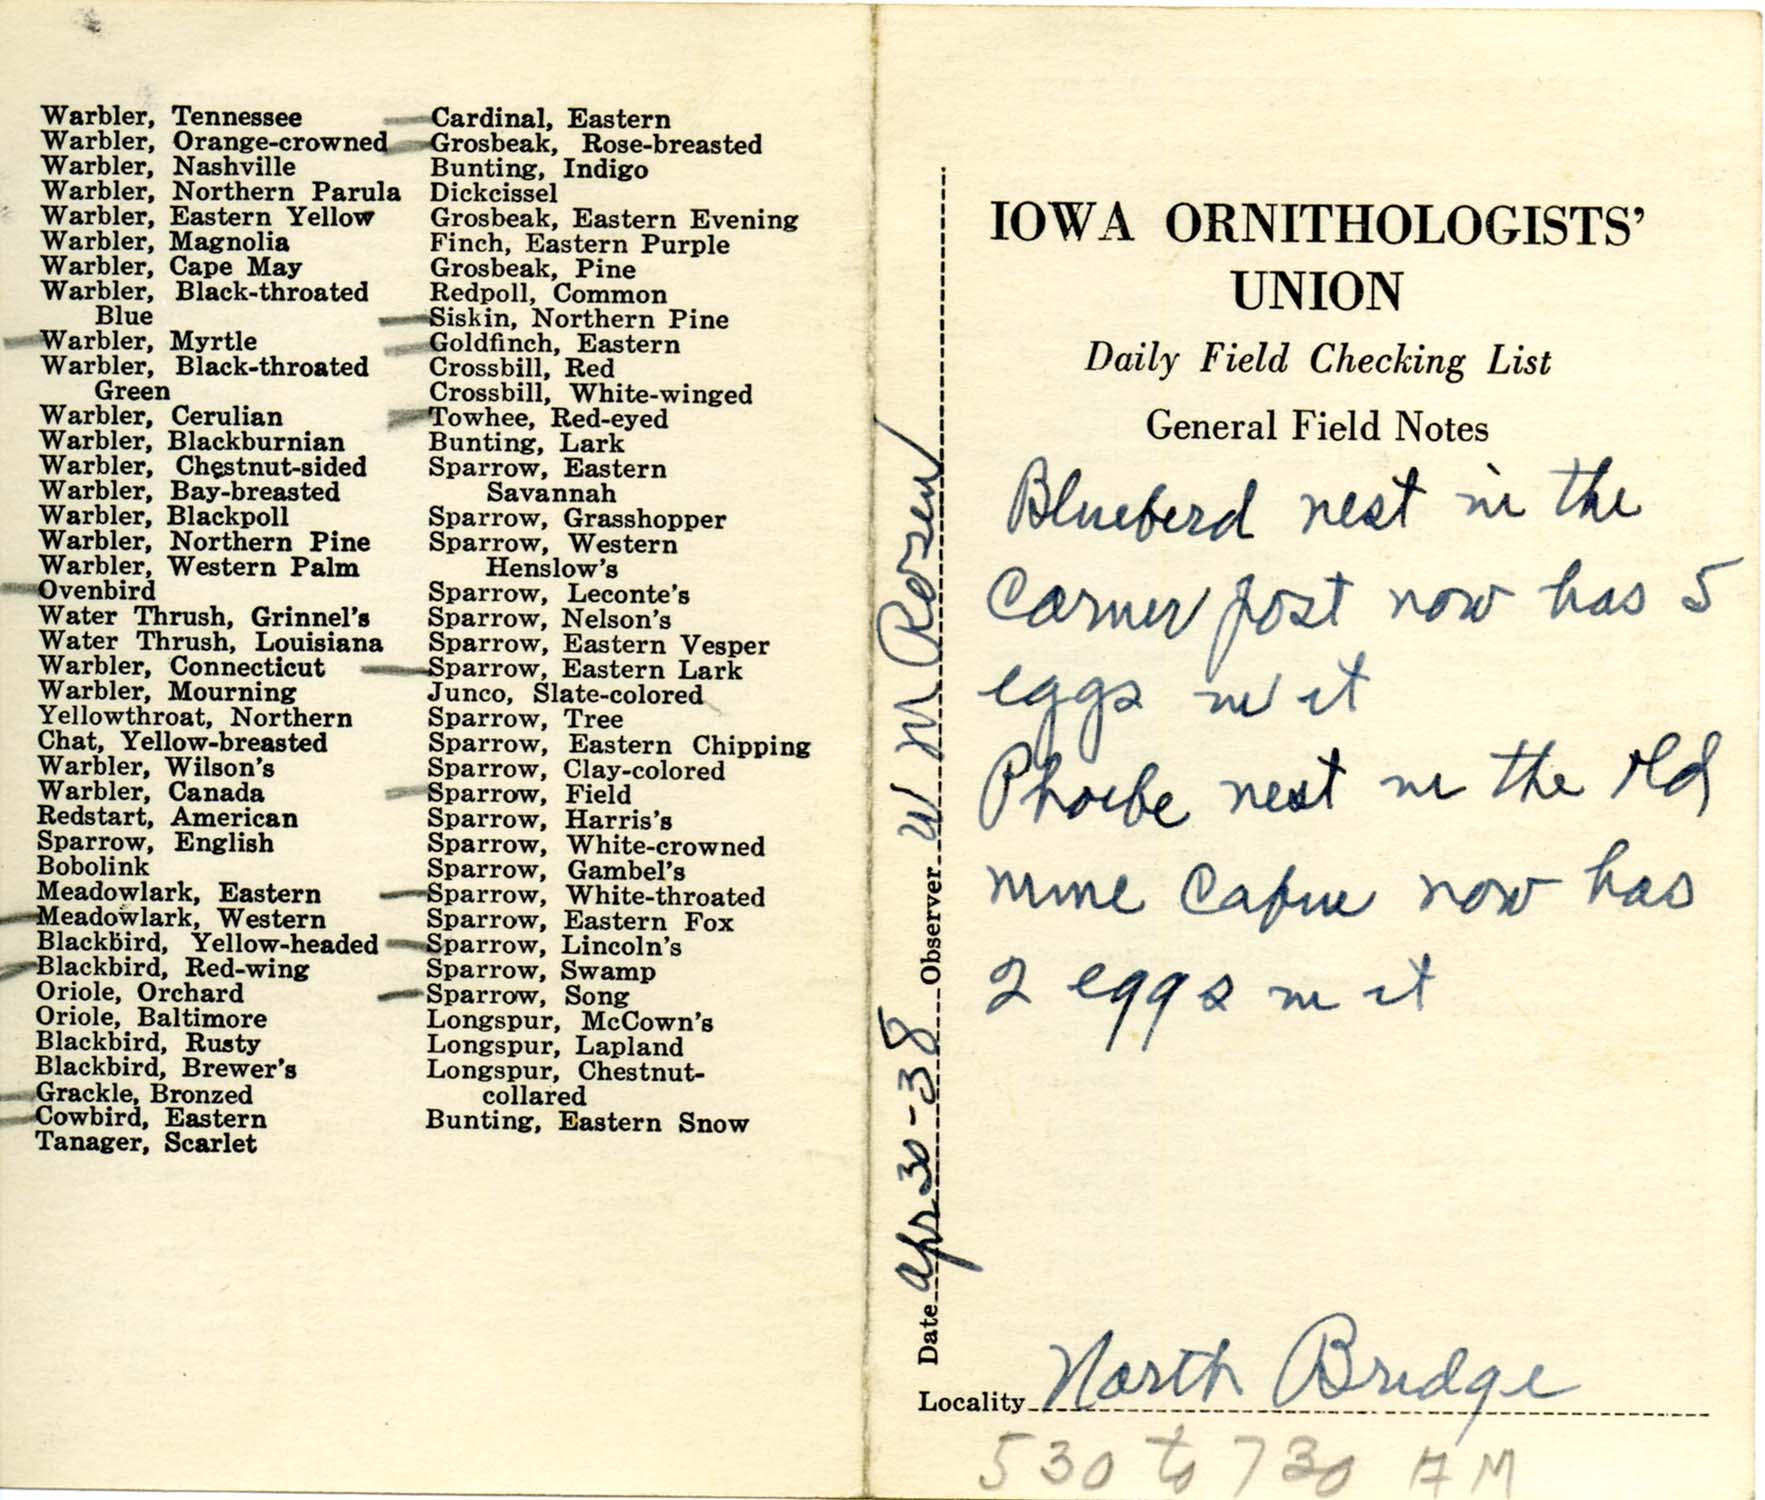 Daily field checking list by Walter Rosene, April 30, 1938